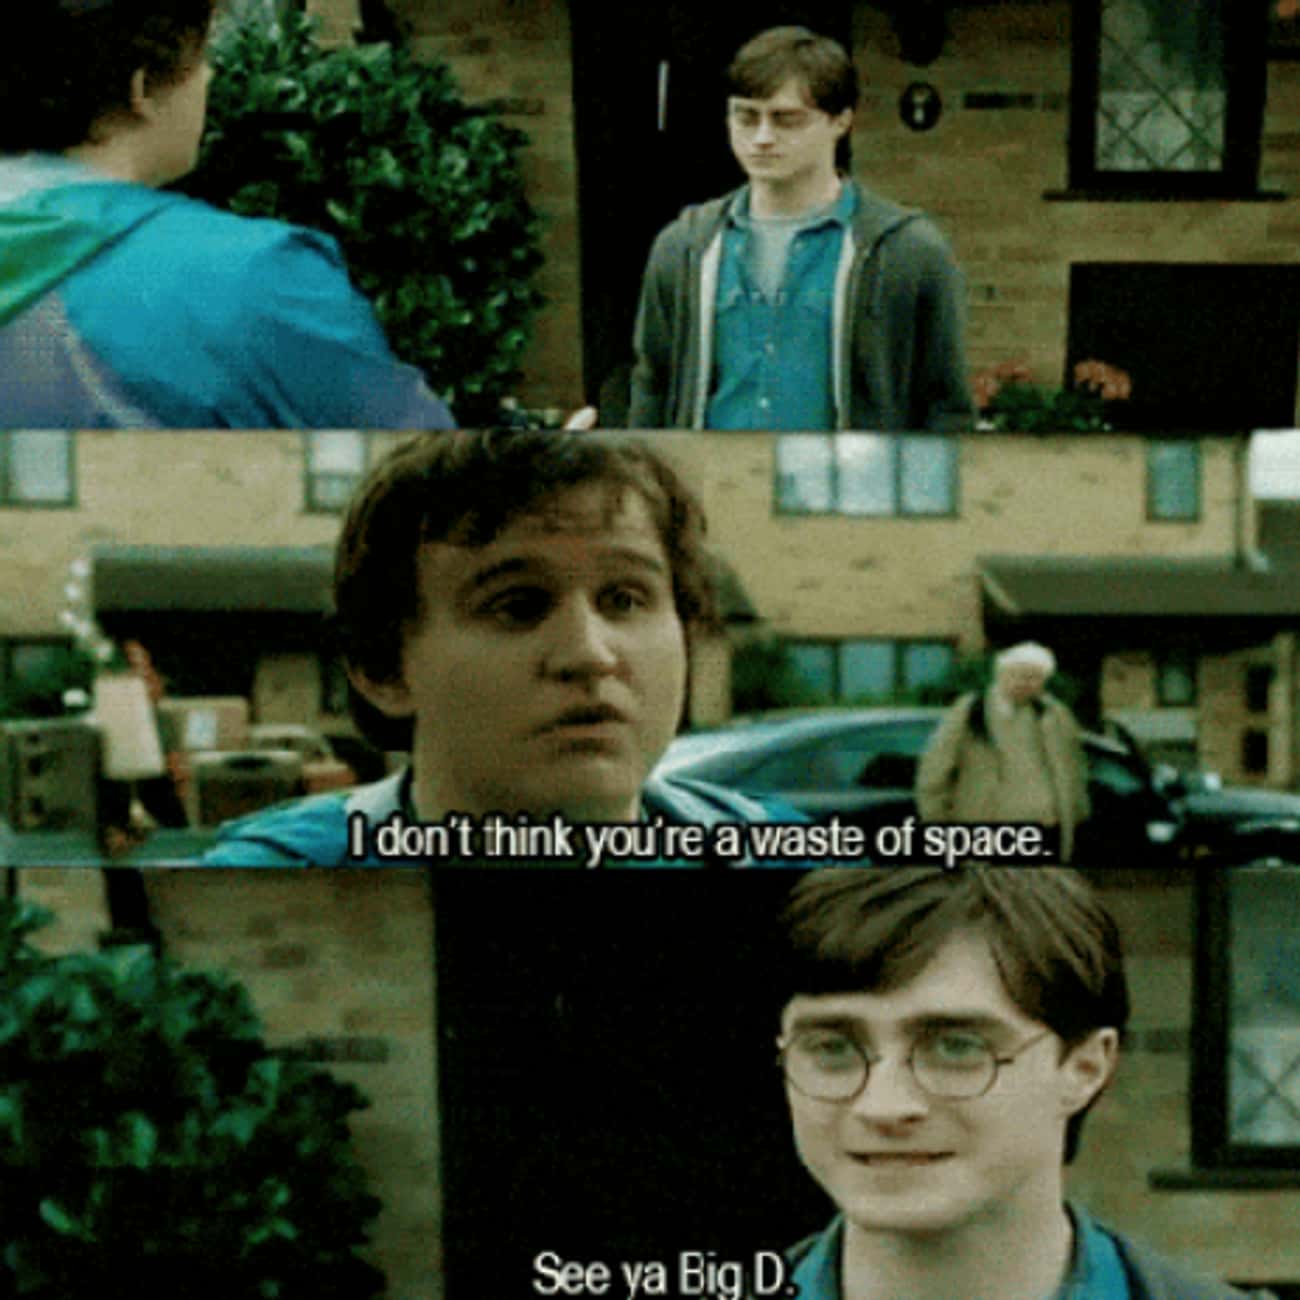 Dudley Tells Harry Potter He's Not A Waste Of Space (Deathly Hallows)